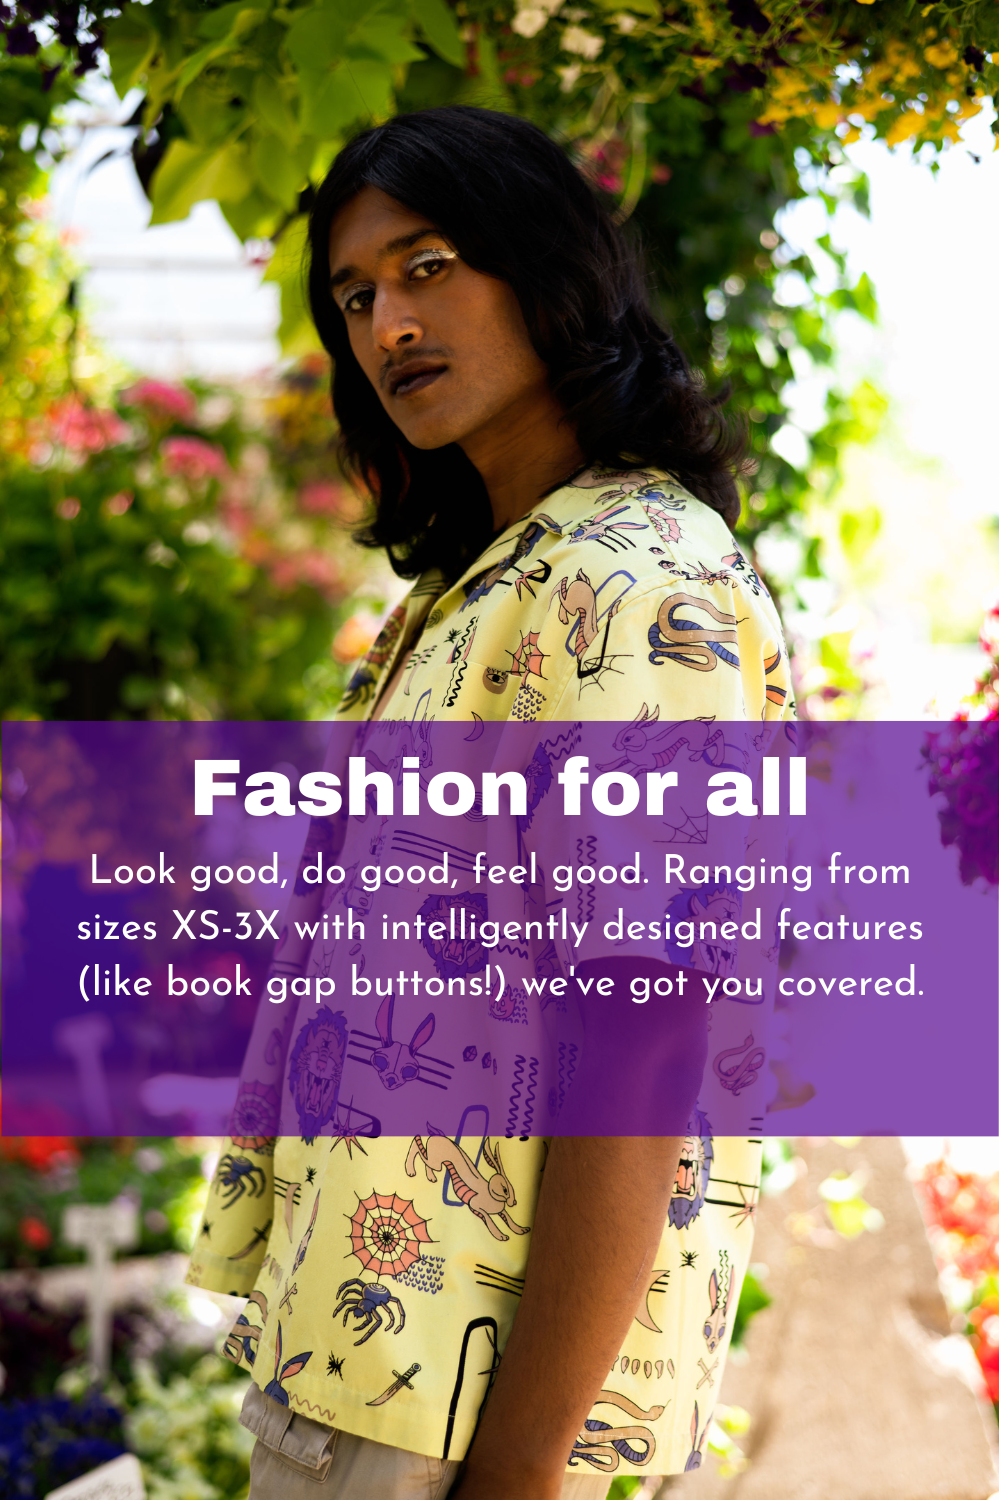 Fashion for all. Look good, do good, feel good. Ranging from sizes XS-3X with intelligently designed features (like book gap buttons!) we've got you covered.